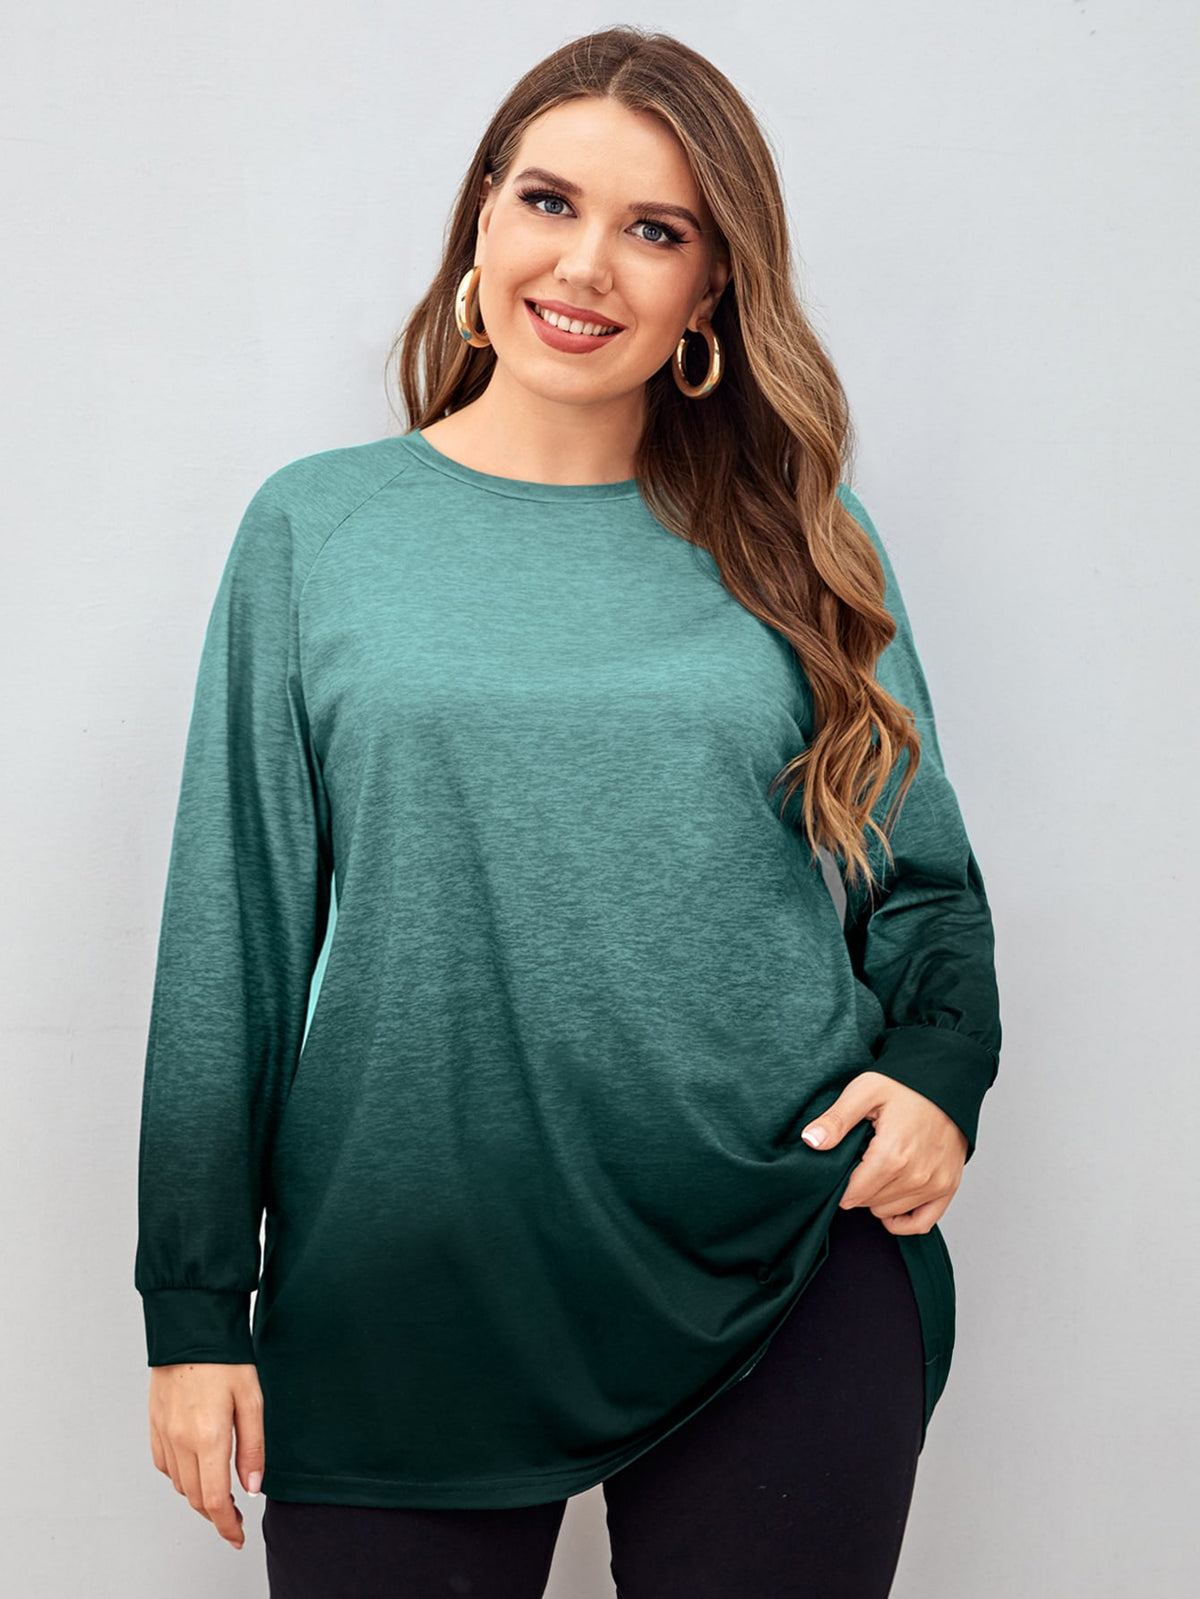 Plus Size Two Tone Tee with Raglan Sleeve - Multicolor / 4XL